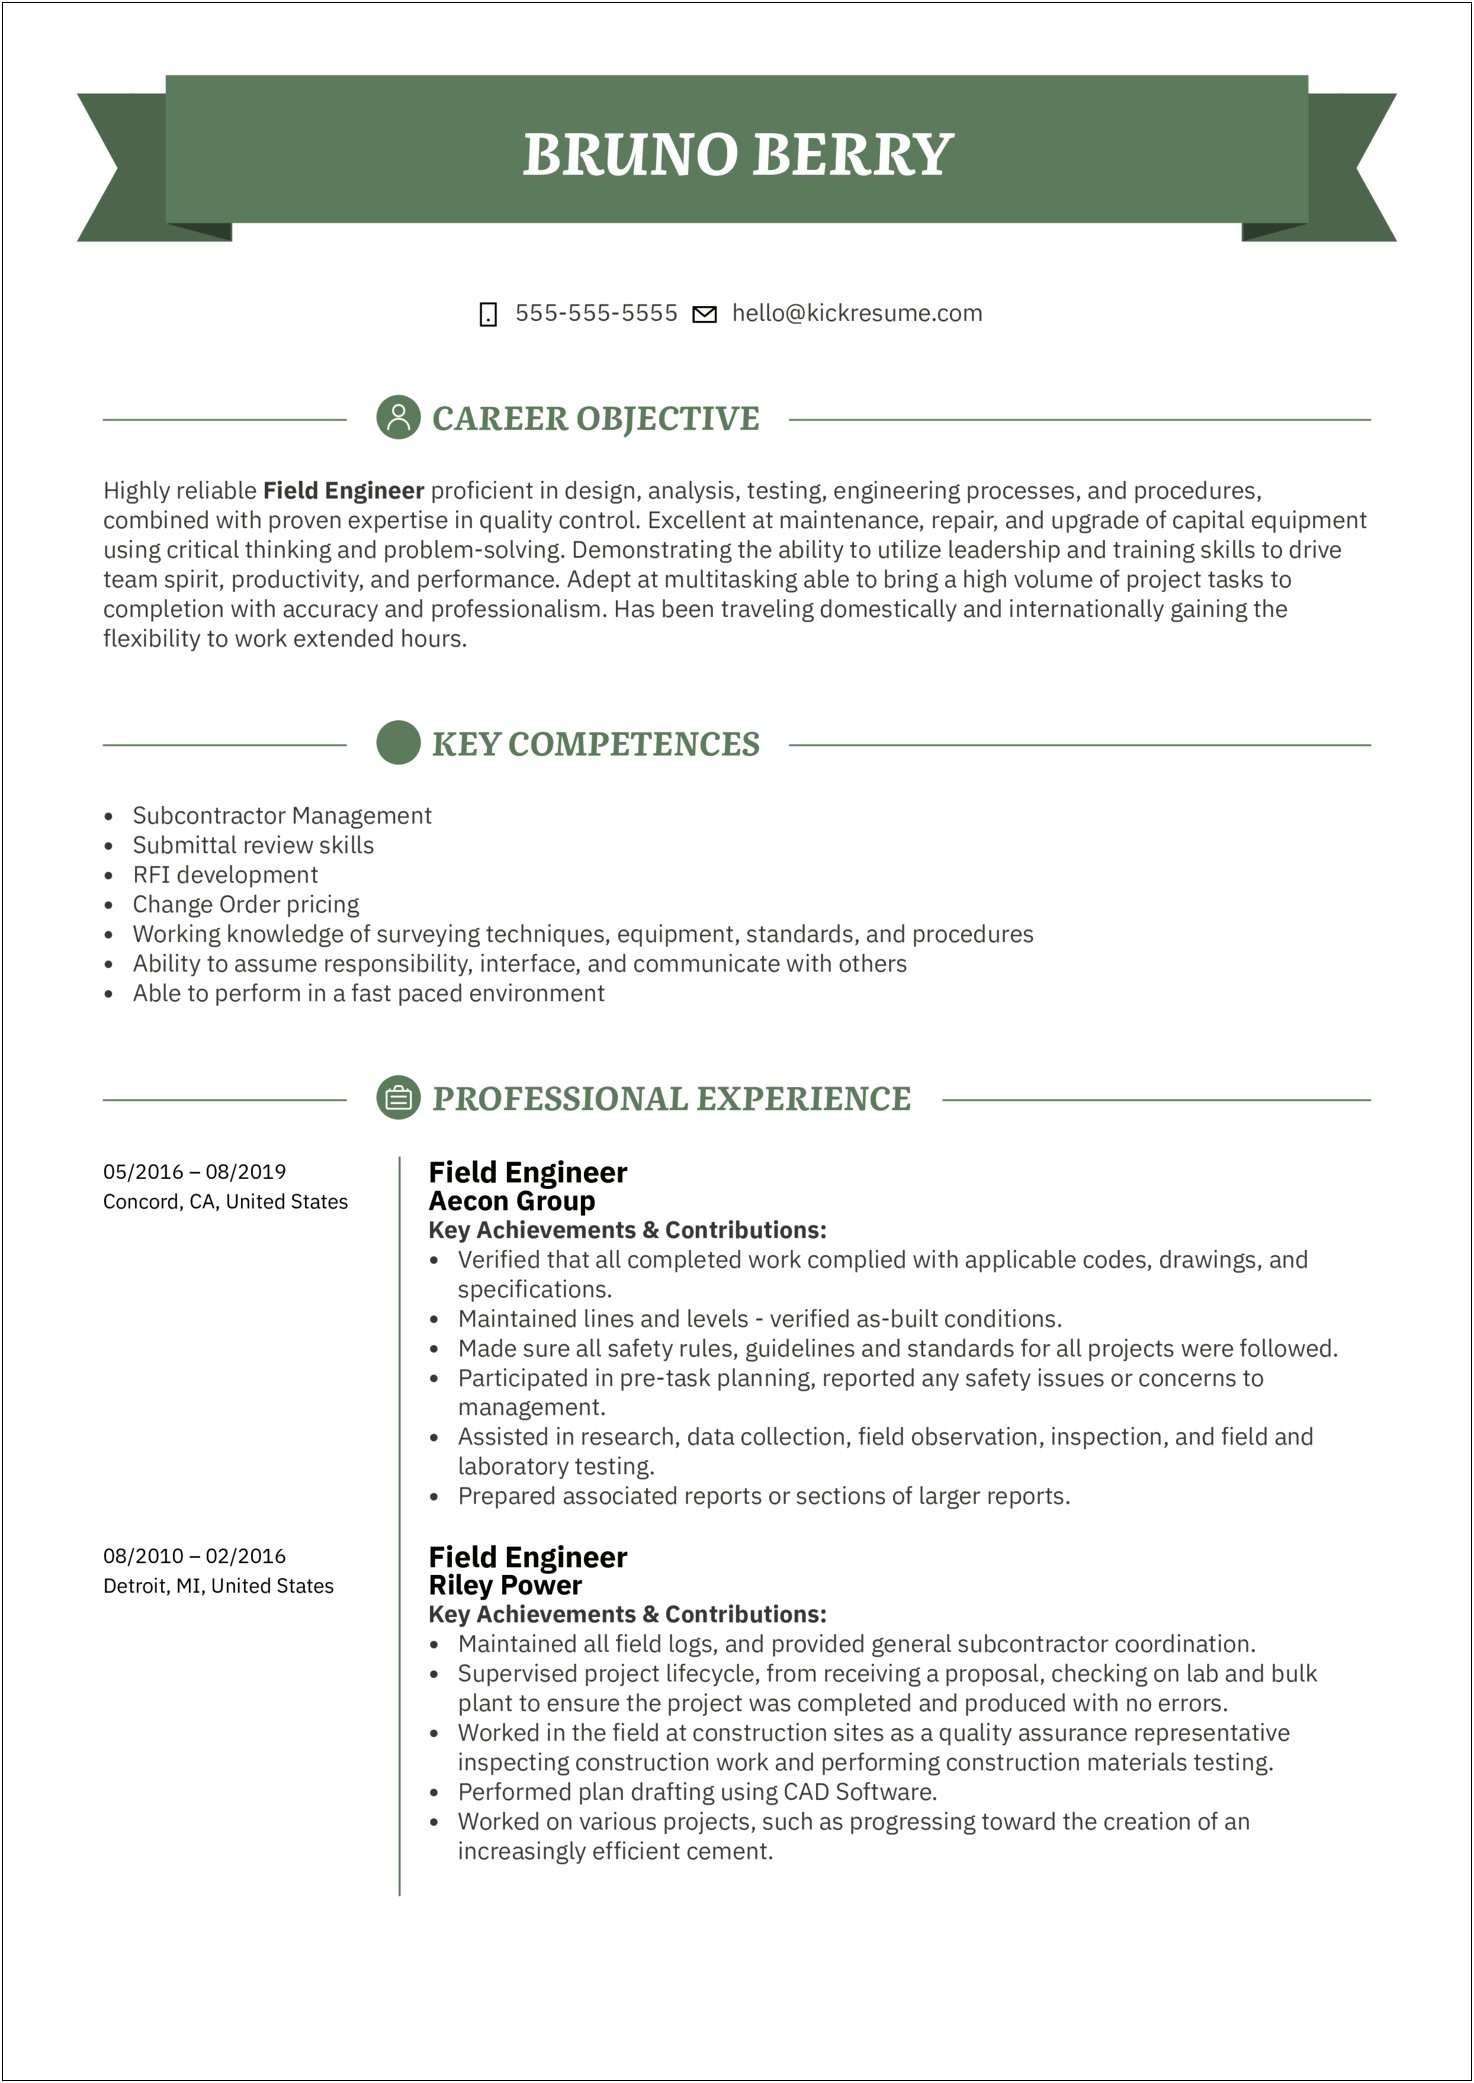 Resume Objective For Engineering Job